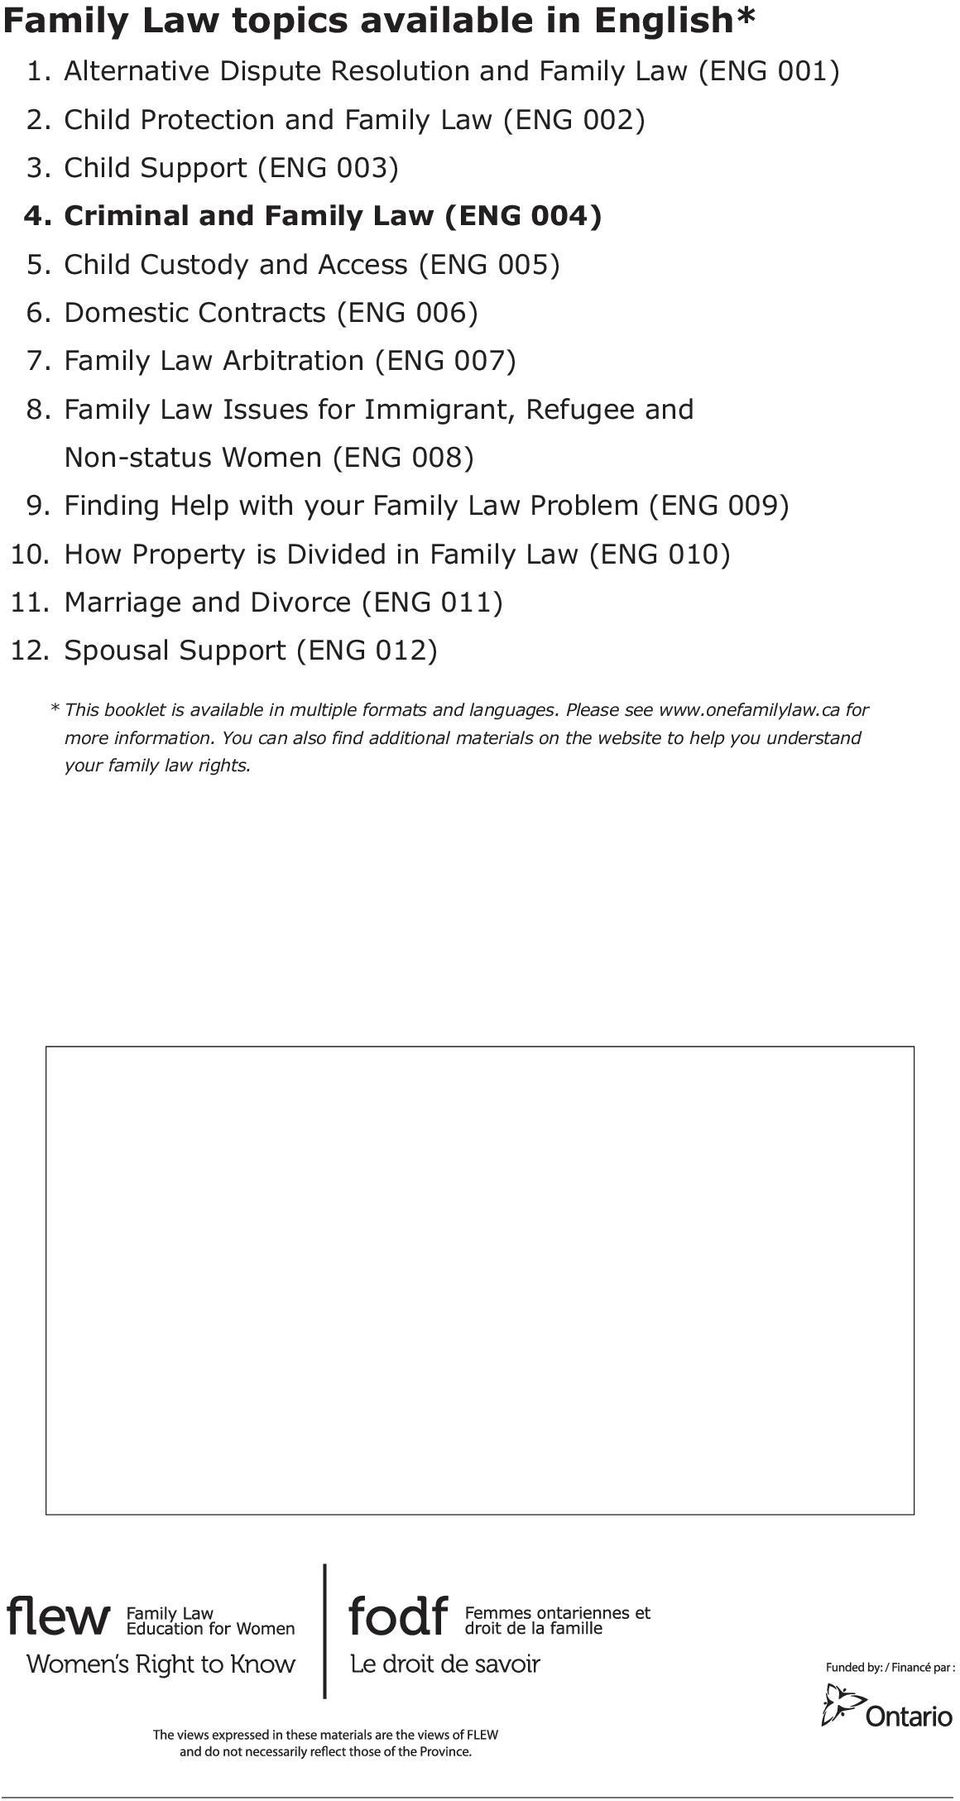 Family Law Issues for Immigrant, Refugee and Non-status Women (ENG 008) 9. Finding Help with your Family Law Problem (ENG 009) 10. How Property is Divided in Family Law (ENG 010) 11.